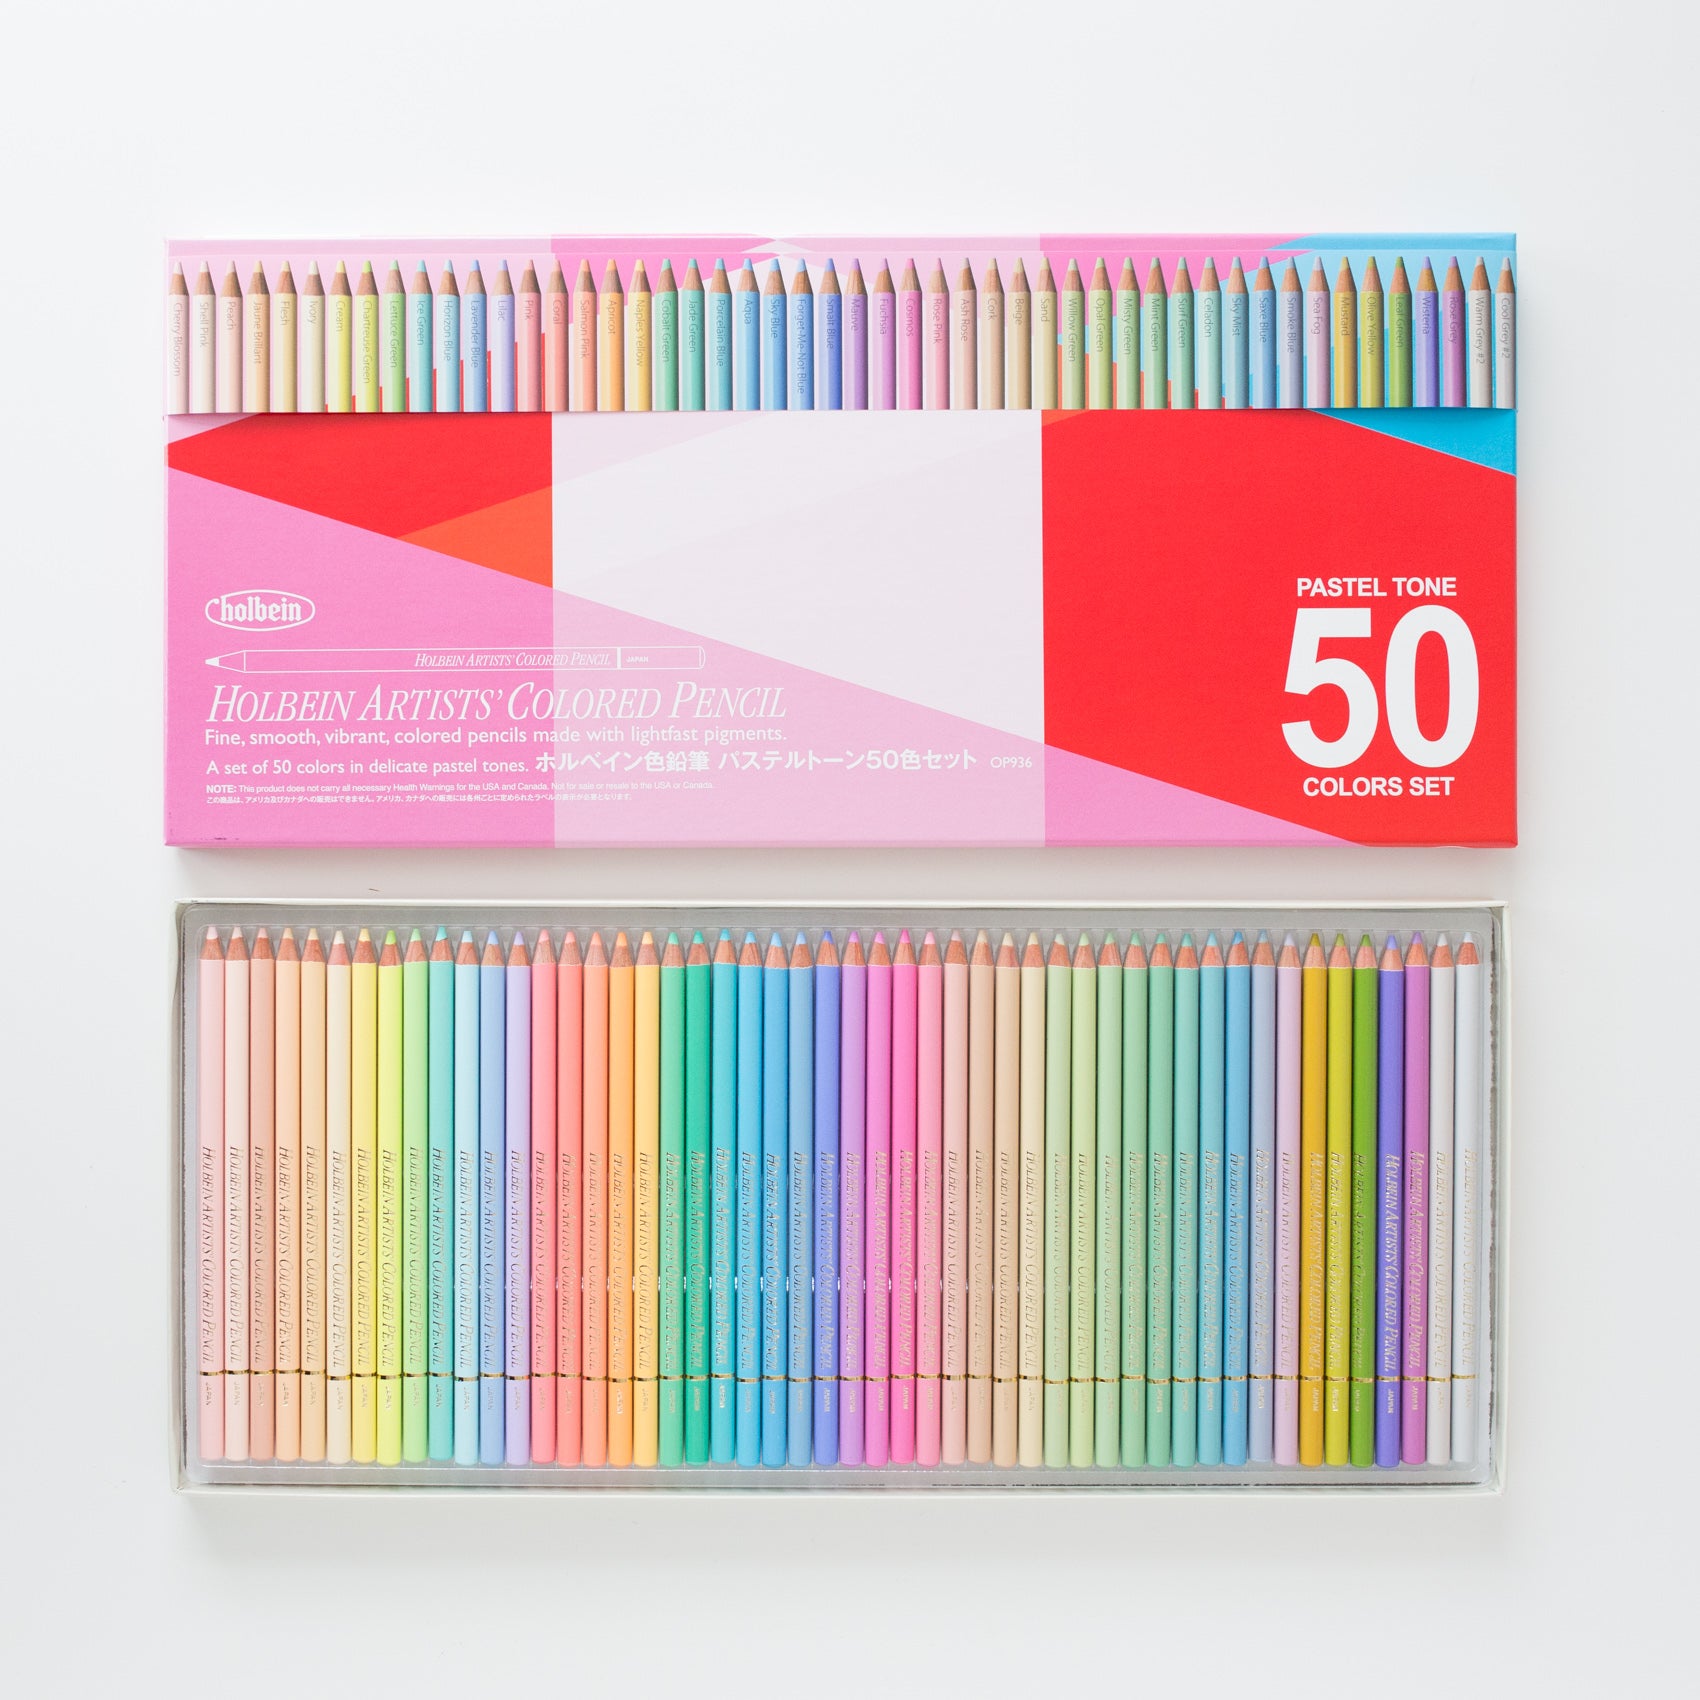 Holbein Artists' 50 Colored Pencil Pastel Tone Set in Paper Box